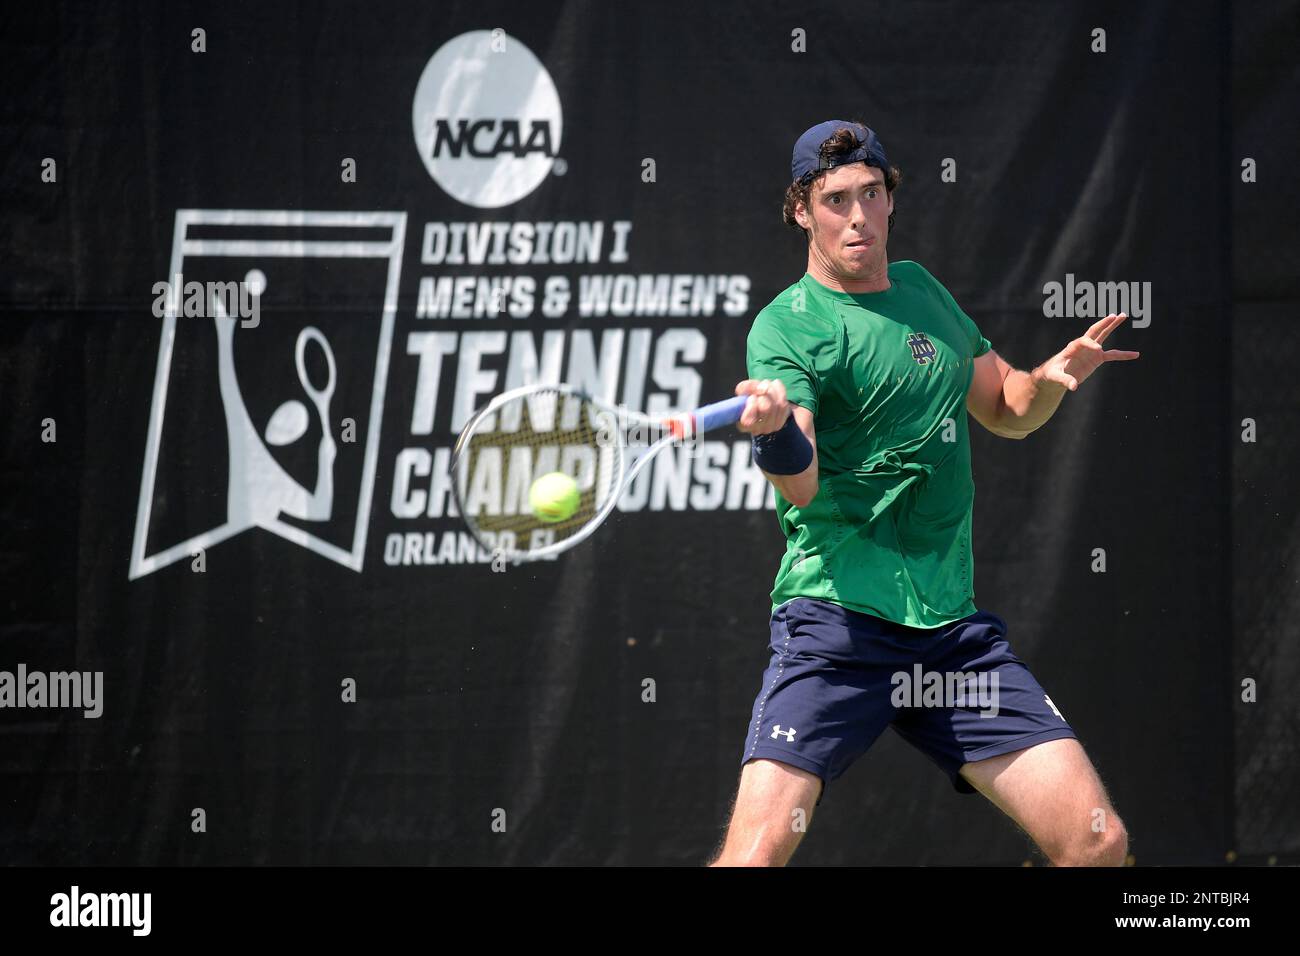 Notre Dame tennis player Alex Lebedev returns a ball during his singles  match against Columbia's Jack Lin during the NCAA Division I Men's Tennis  Championships Monday, May 20, 2019, in Orlando, Fla. (